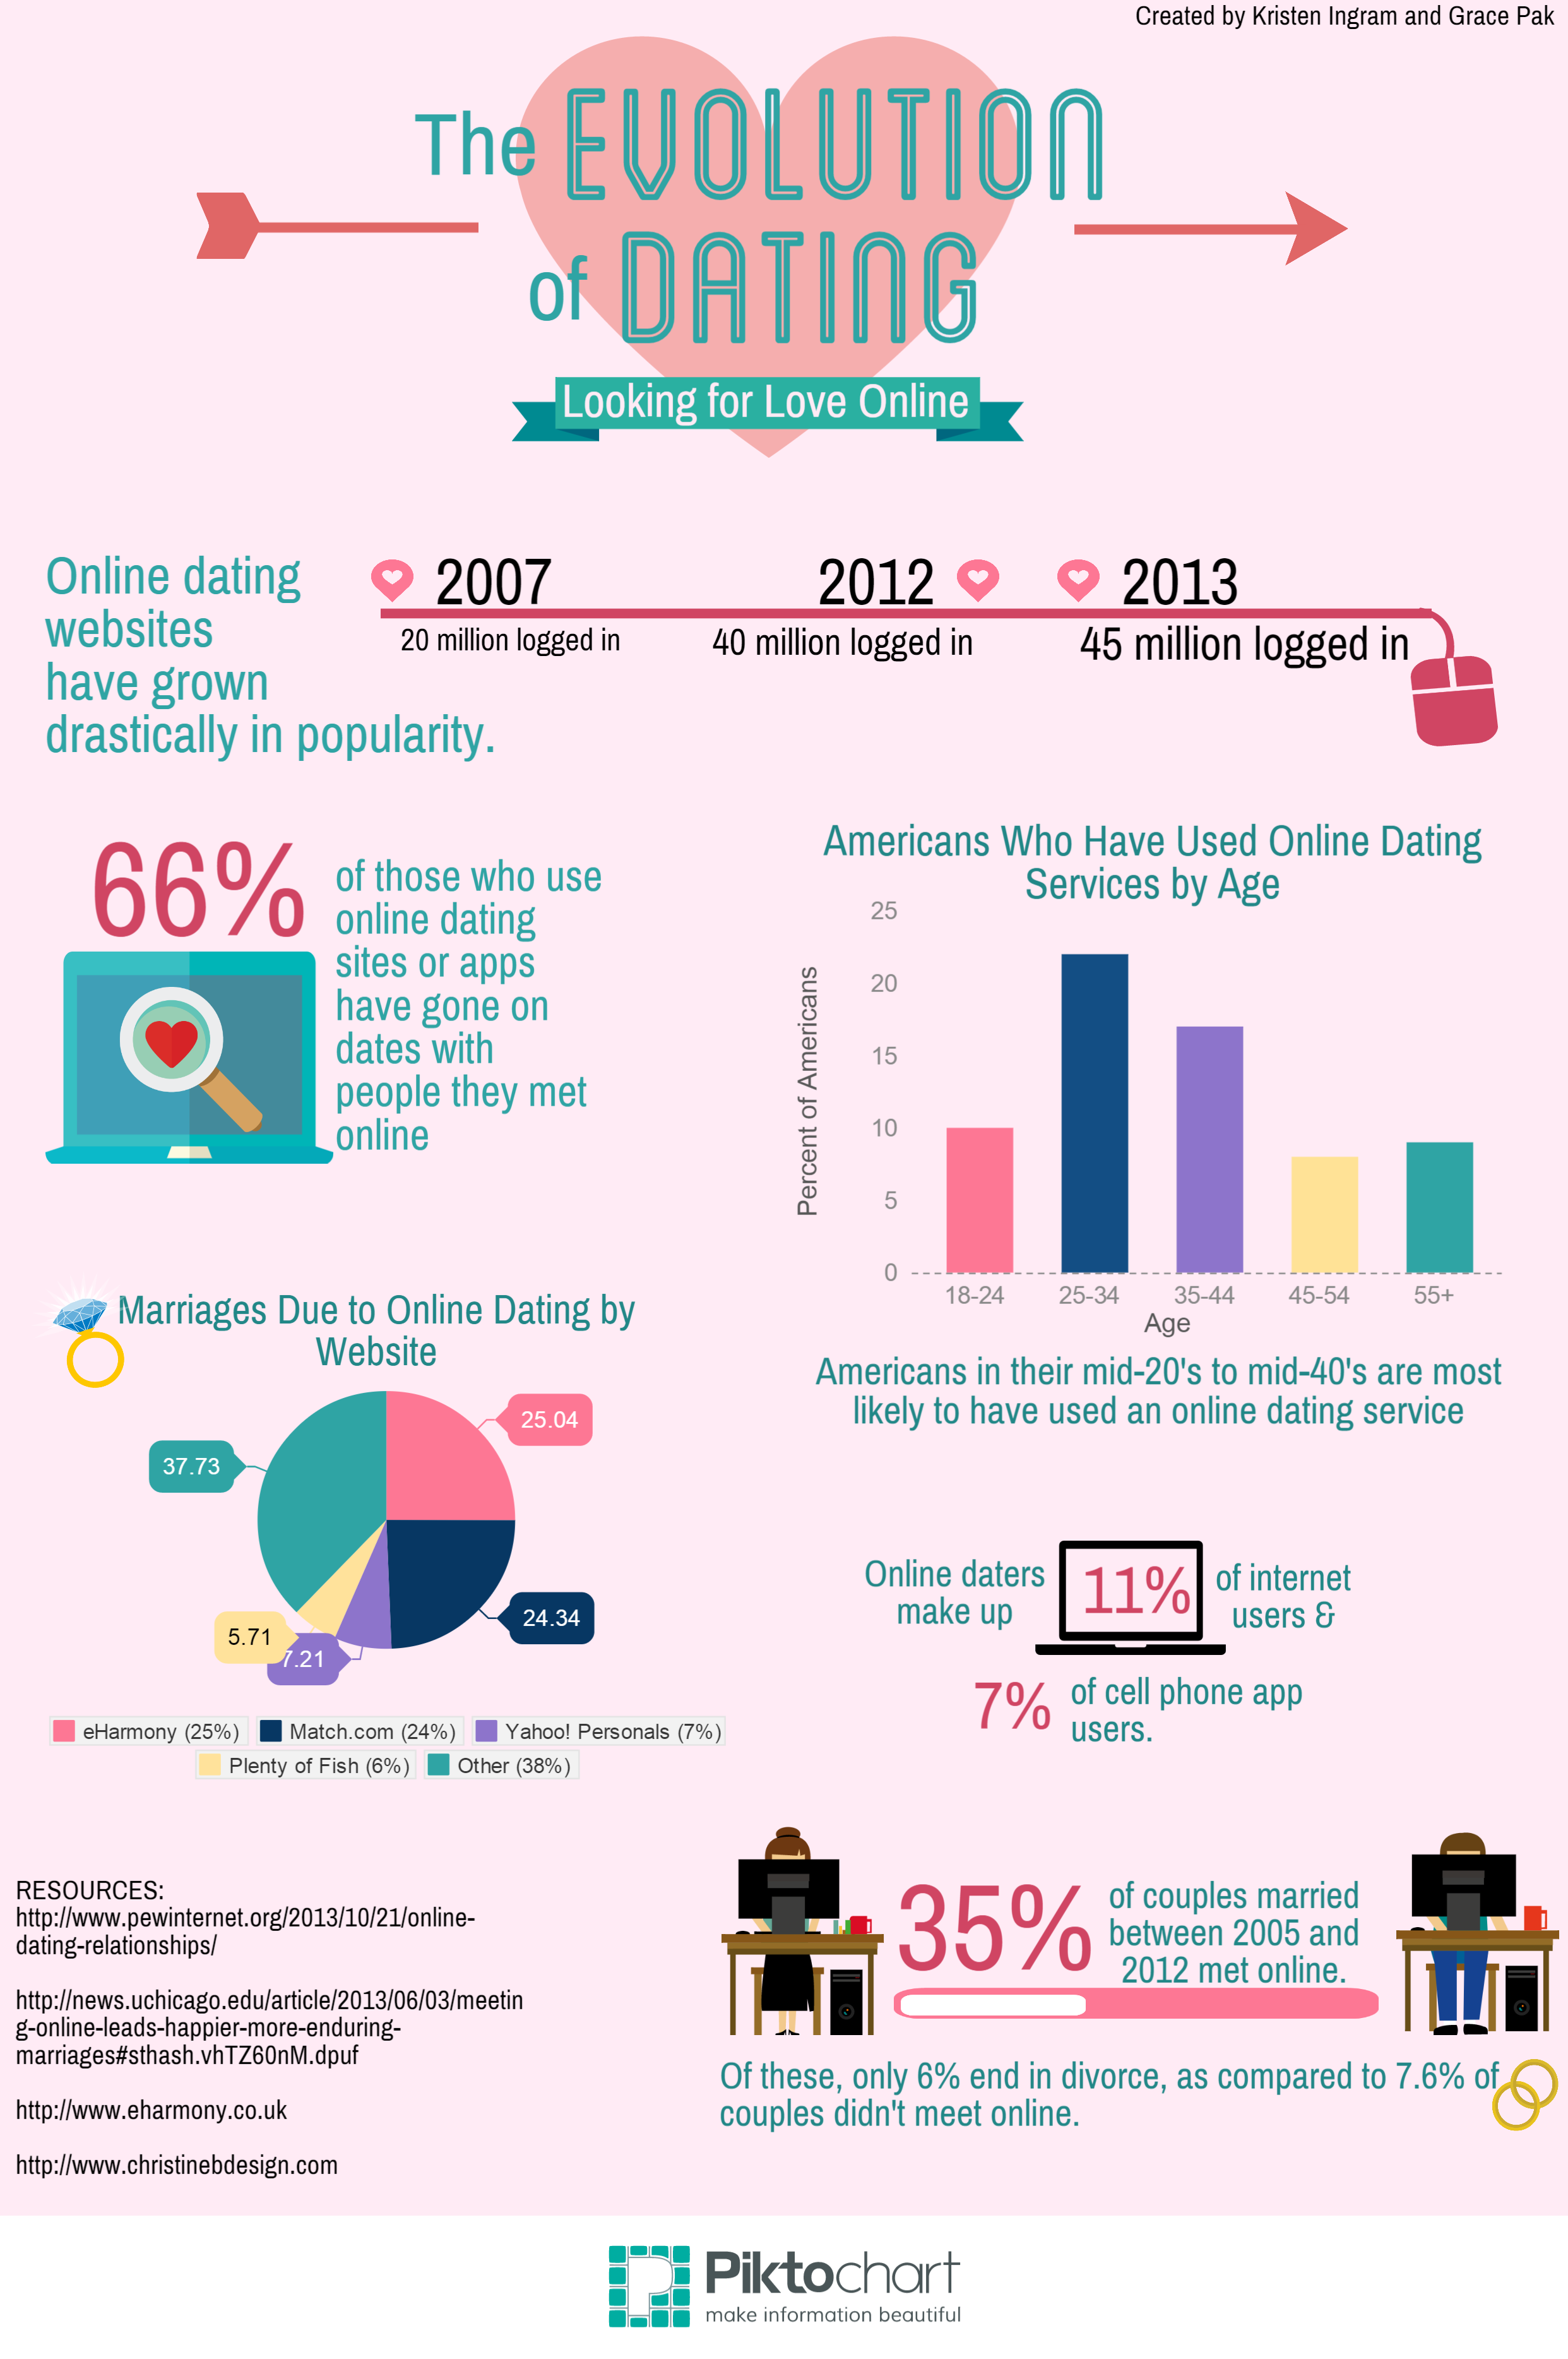 online dating Infographic